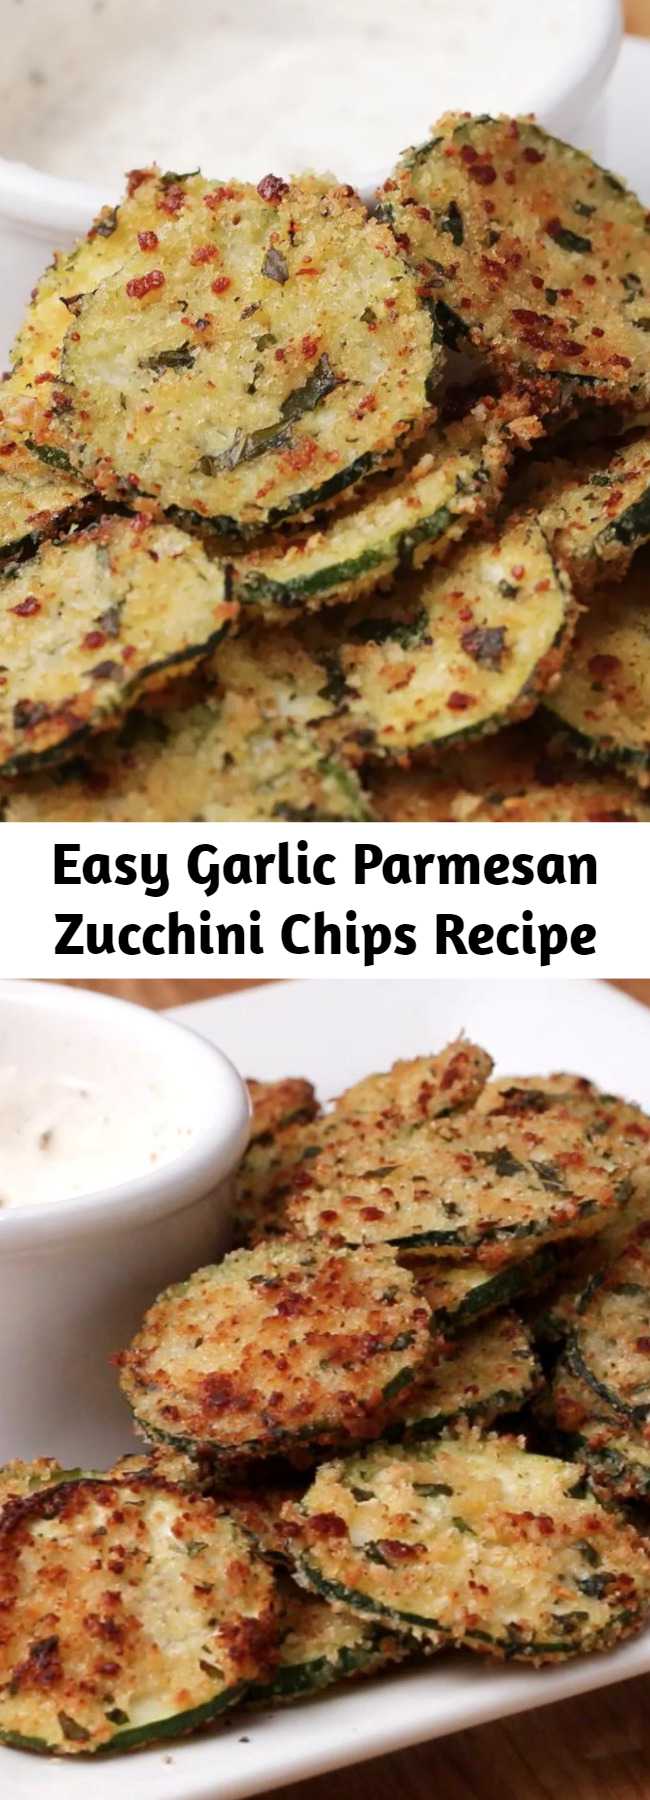 Easy Garlic Parmesan Zucchini Chips Recipe - Combine garlic, parmesan, and zucchini and you've got yourself a totally delicious snack.